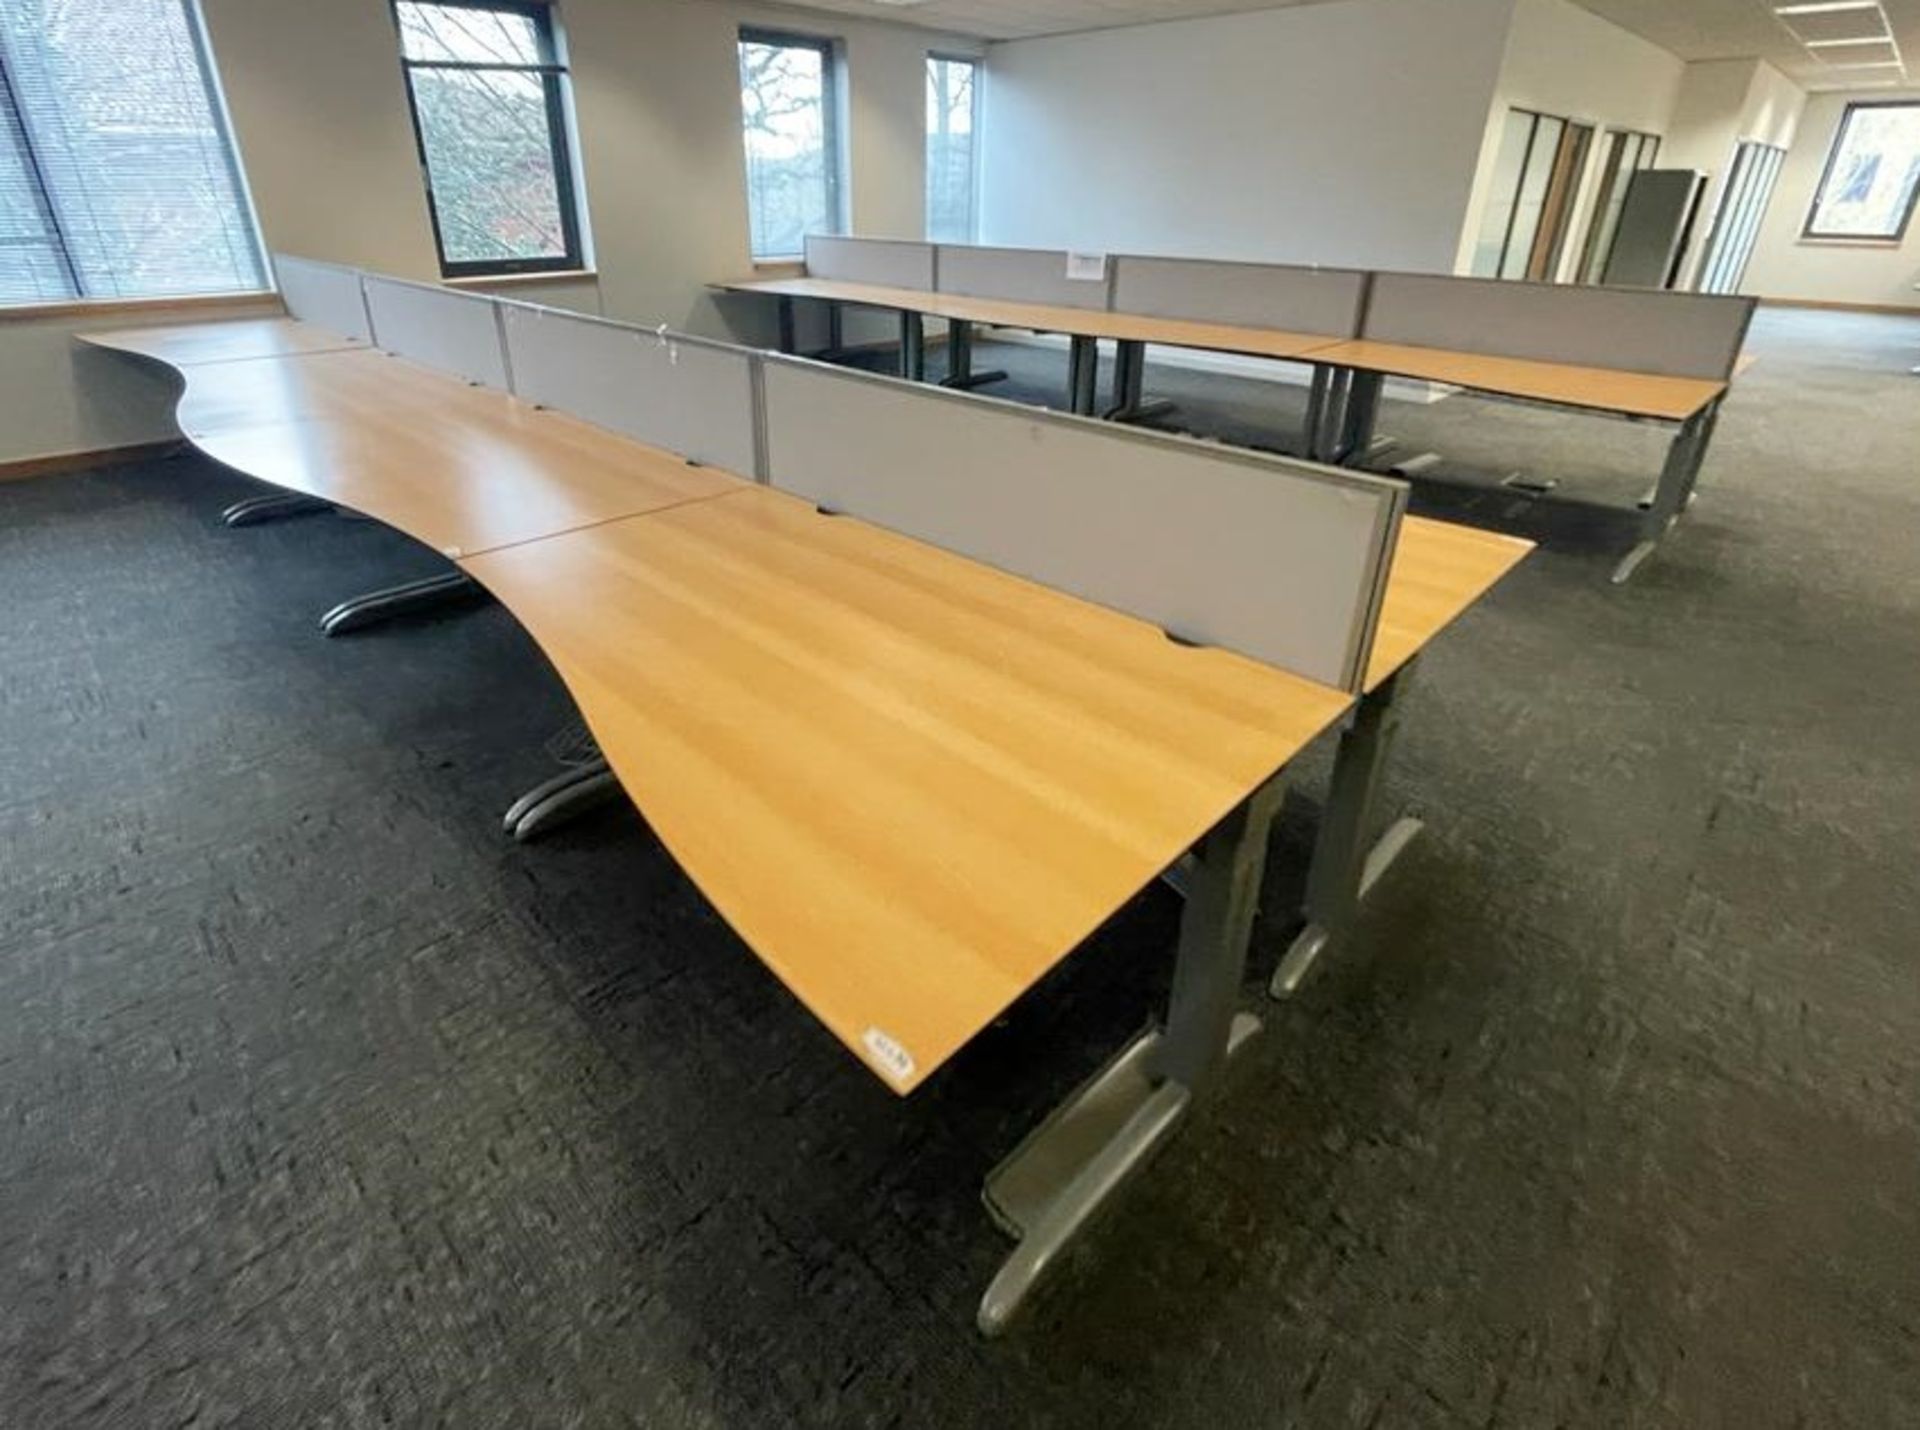 4 x Techo Wave Office Desks With Privacy Panels and Cable Tidy Cages - Beech Wood Finish - Image 7 of 17